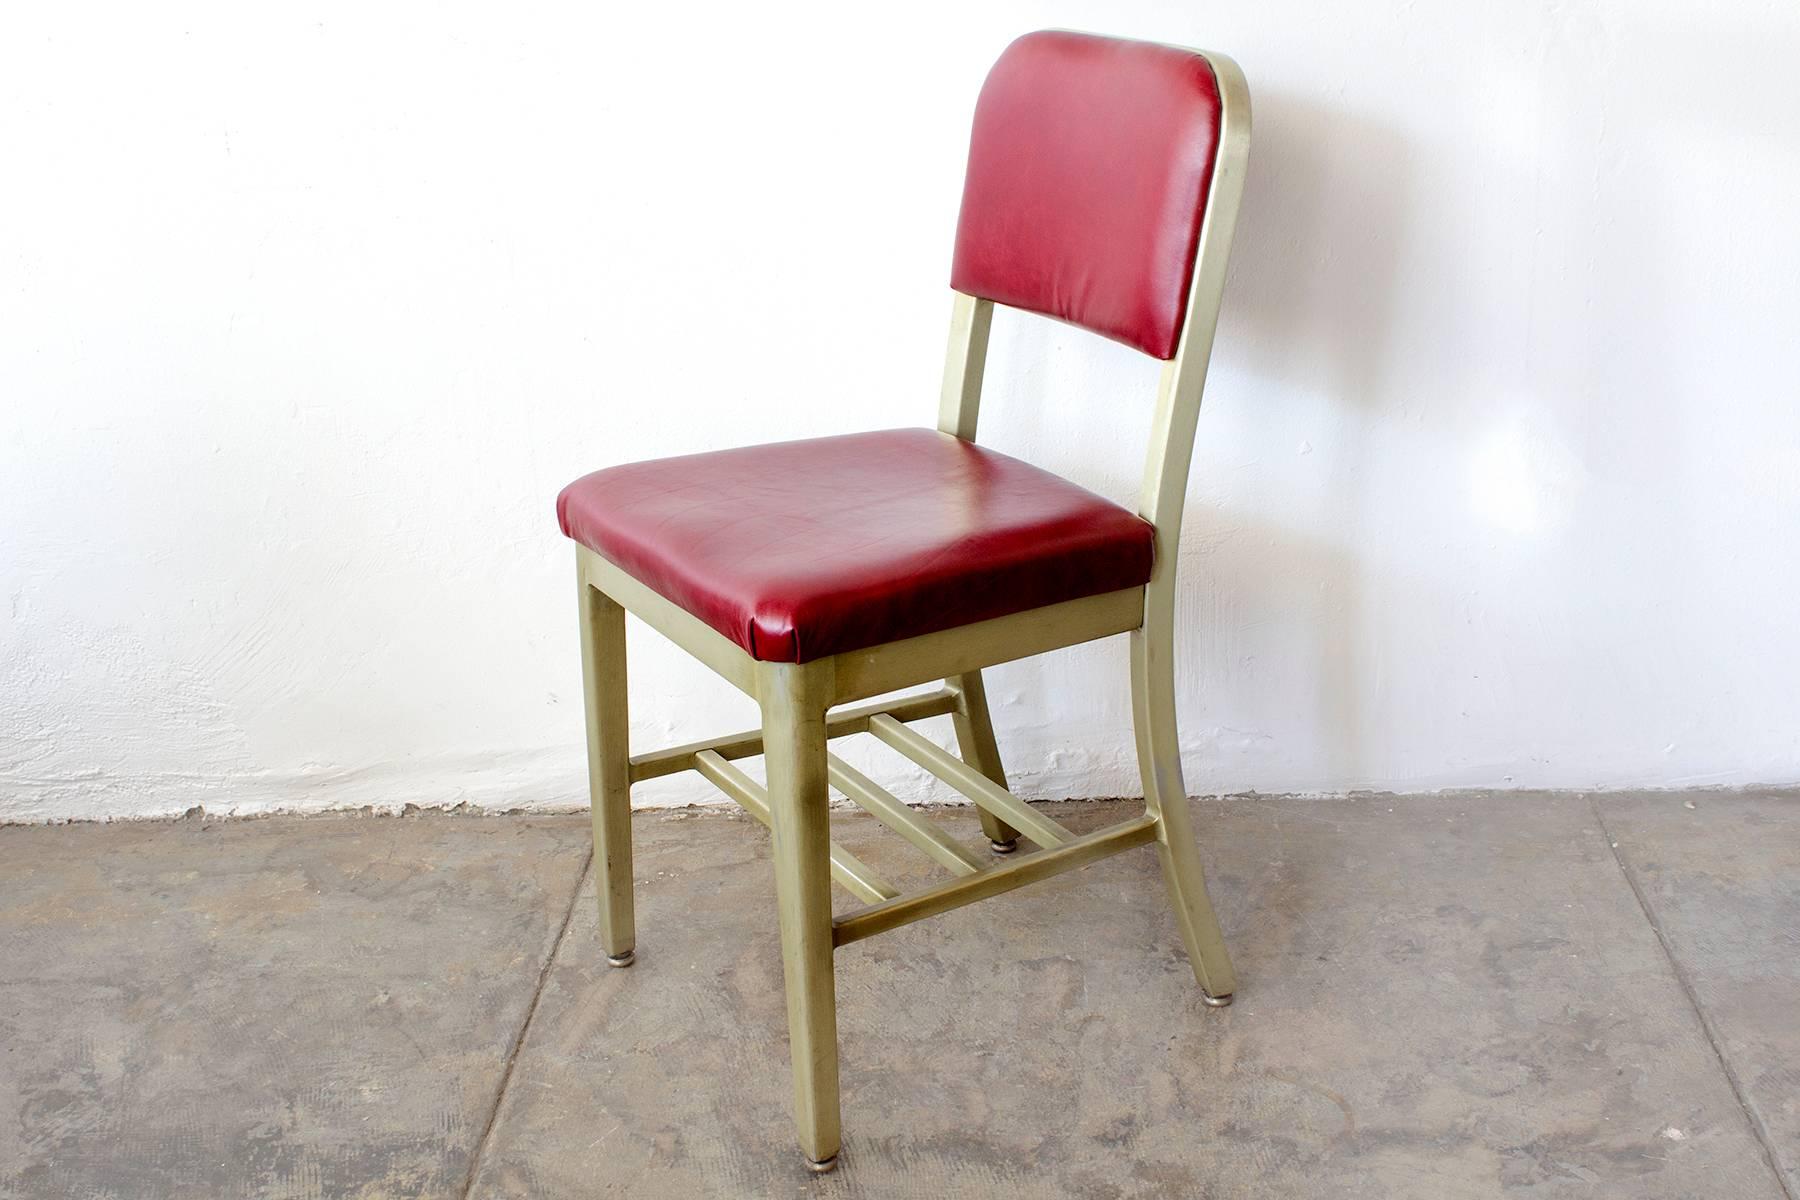 Fantastic set of GoodForm side chairs, circa 1950s. The aluminium frames on these chairs feature an uncommon anodized gold finish that we've polished and restored. Seats are newly reupholstered in a rich cherry red leather. This Classic,